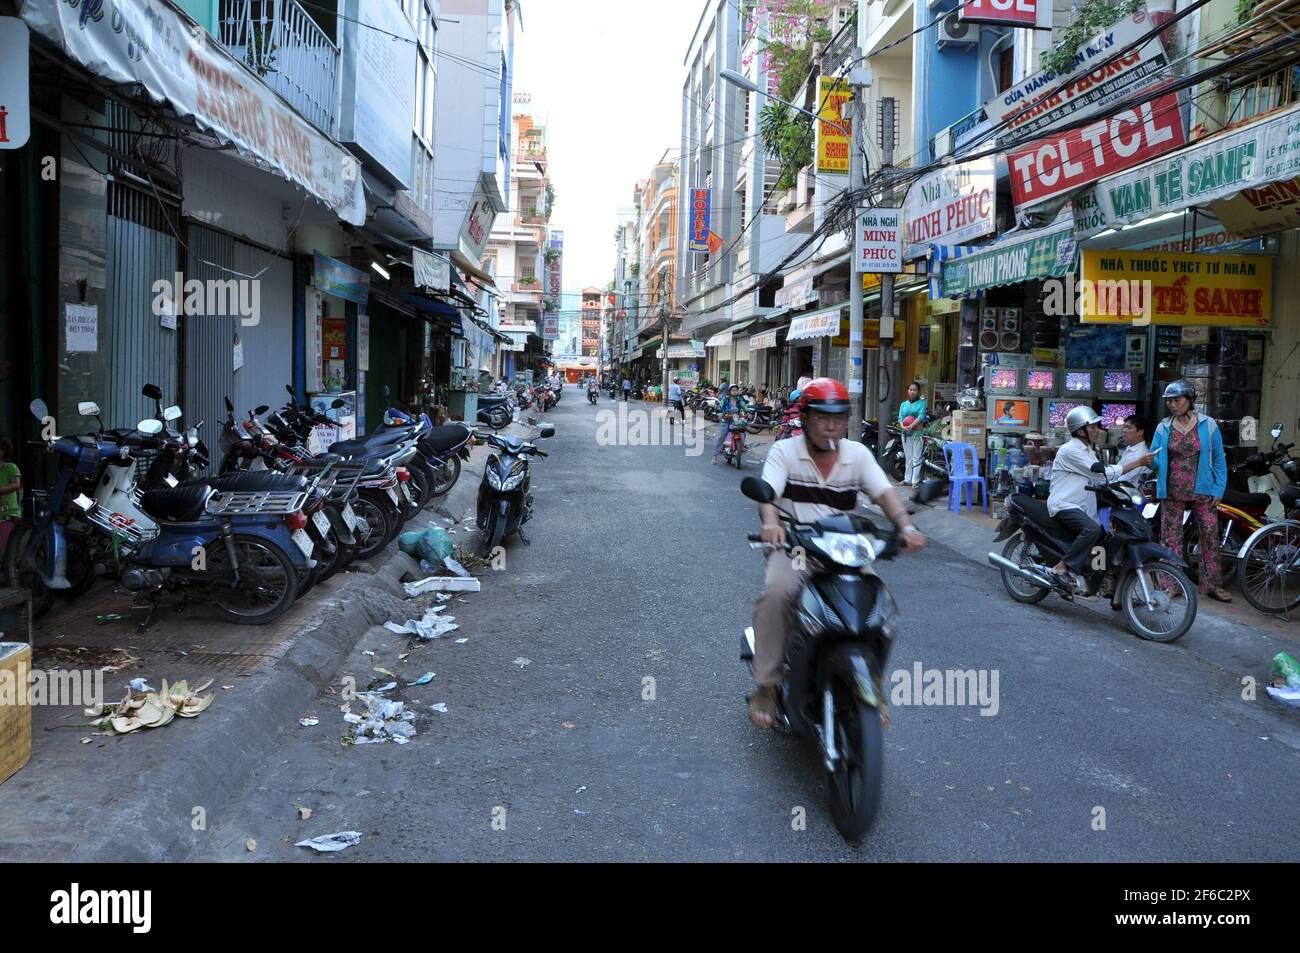 CAN THO, VIETNAM - FEBRUARY 17, 2013: Thousands of motorbikes and scooters in Can Tho, Vietnam. In the biggest city of the Mekong delta the traffic is Stock Photo